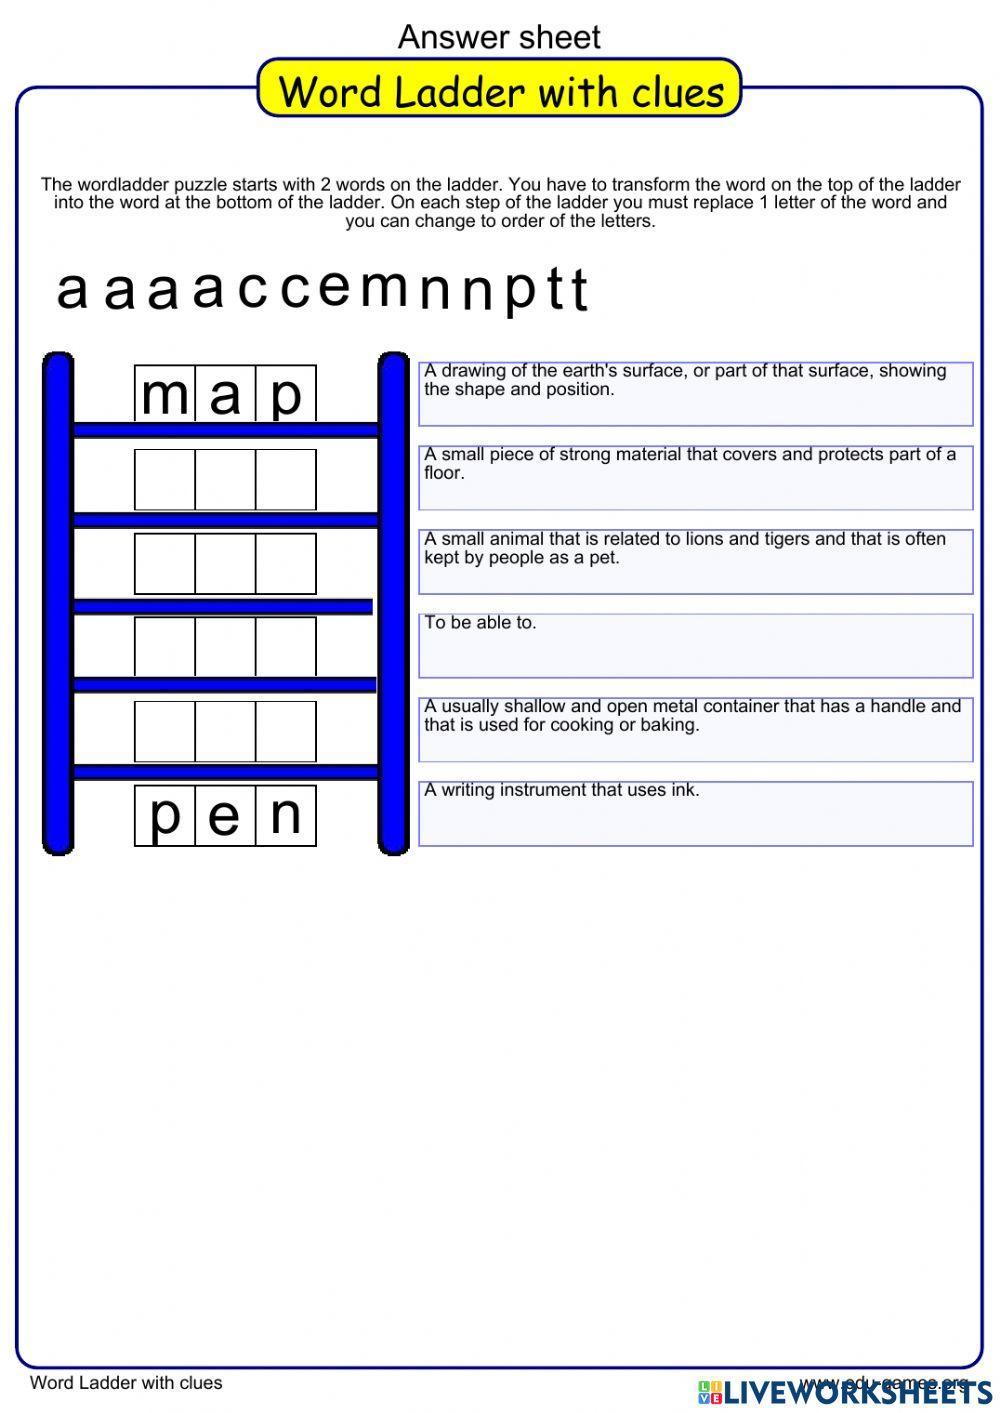 Word Ladder: map to pen